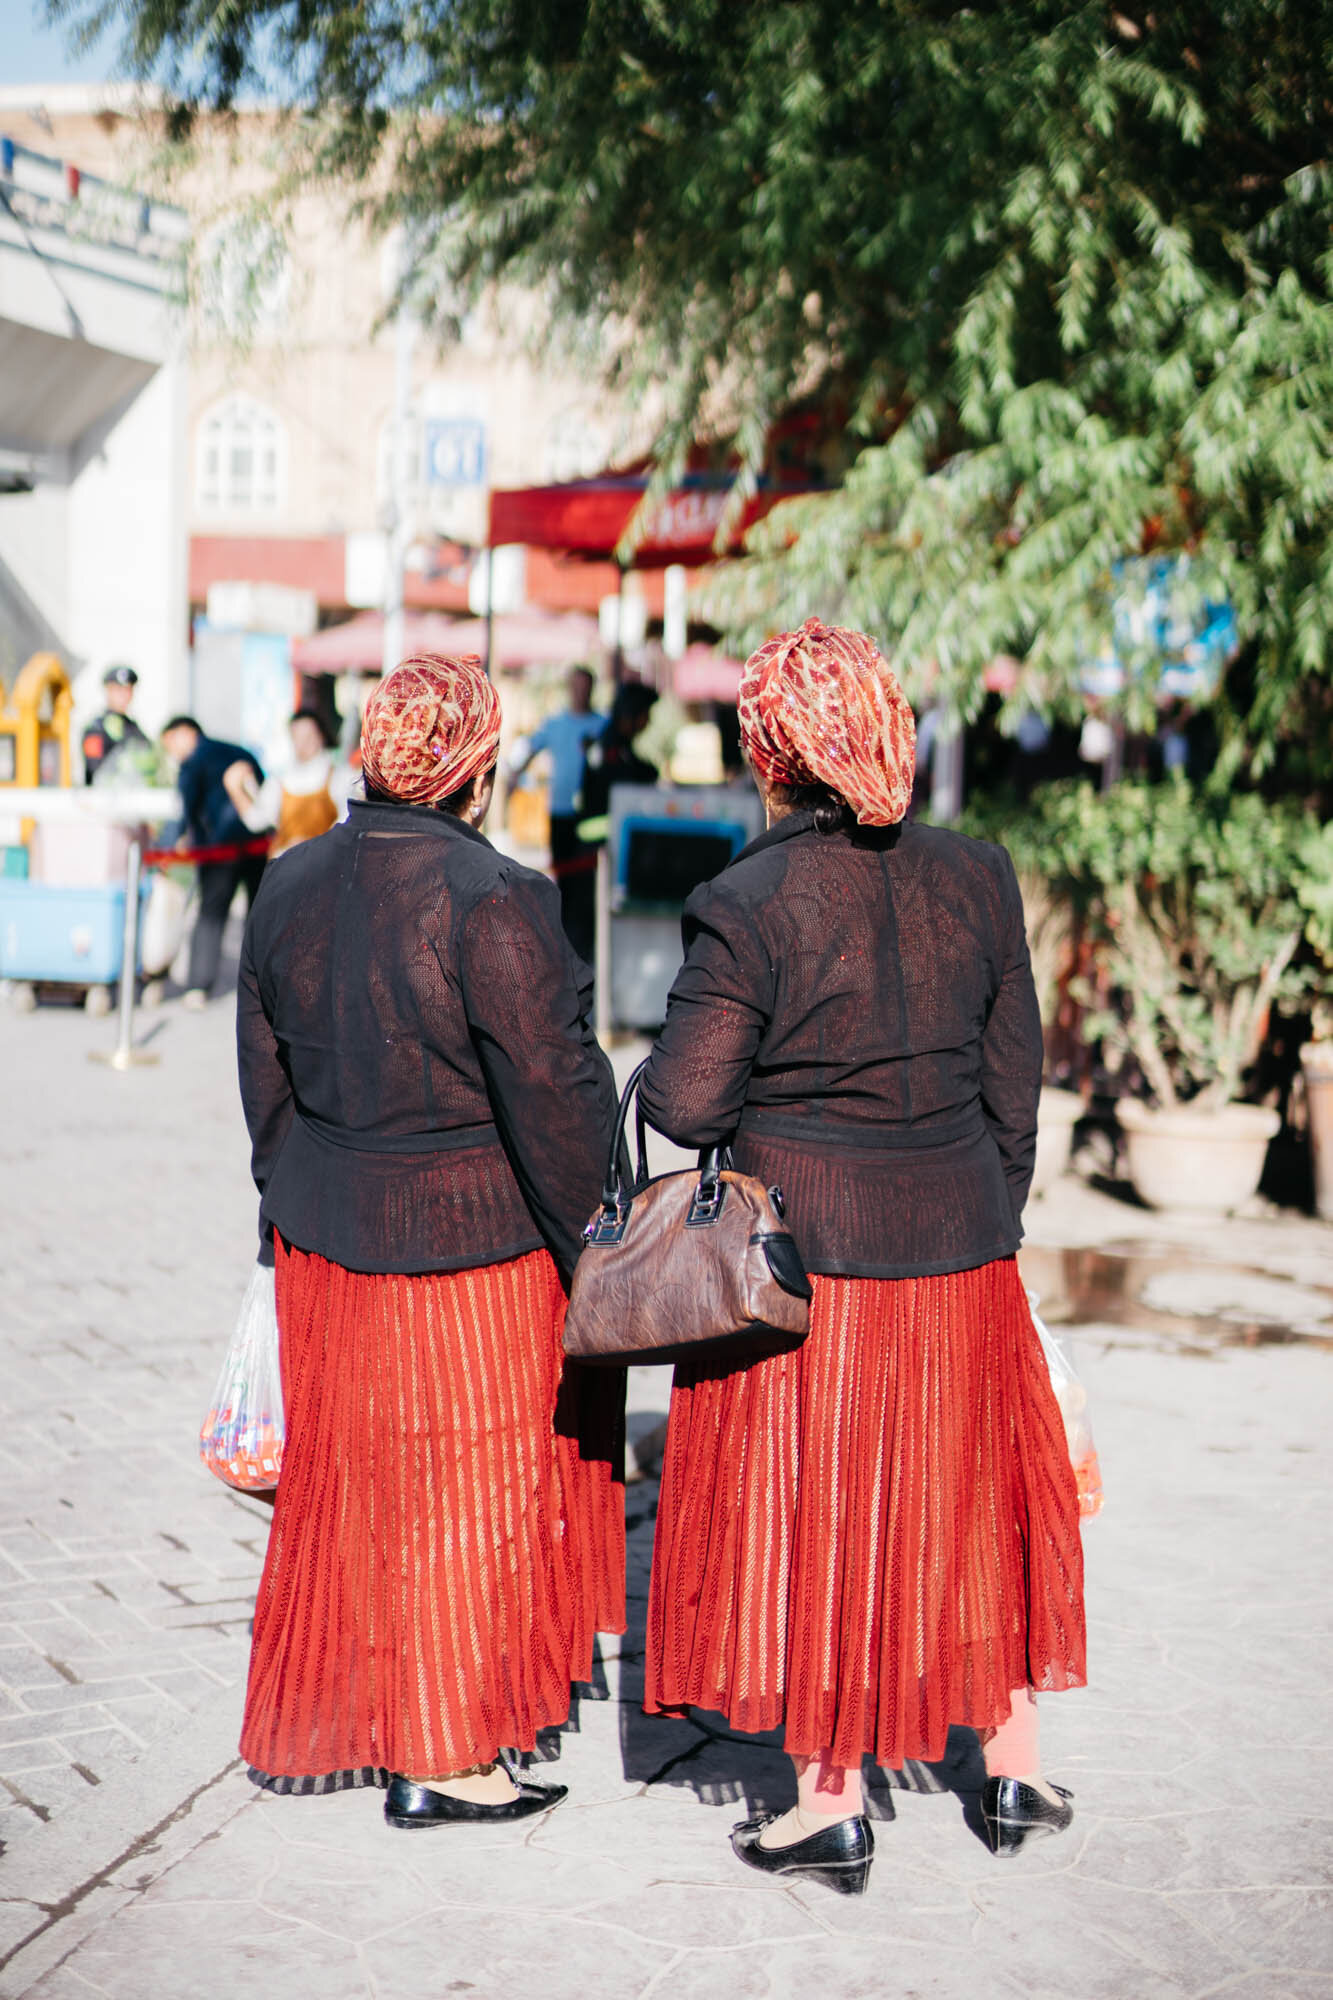 Two Uyghur women in matching outfits